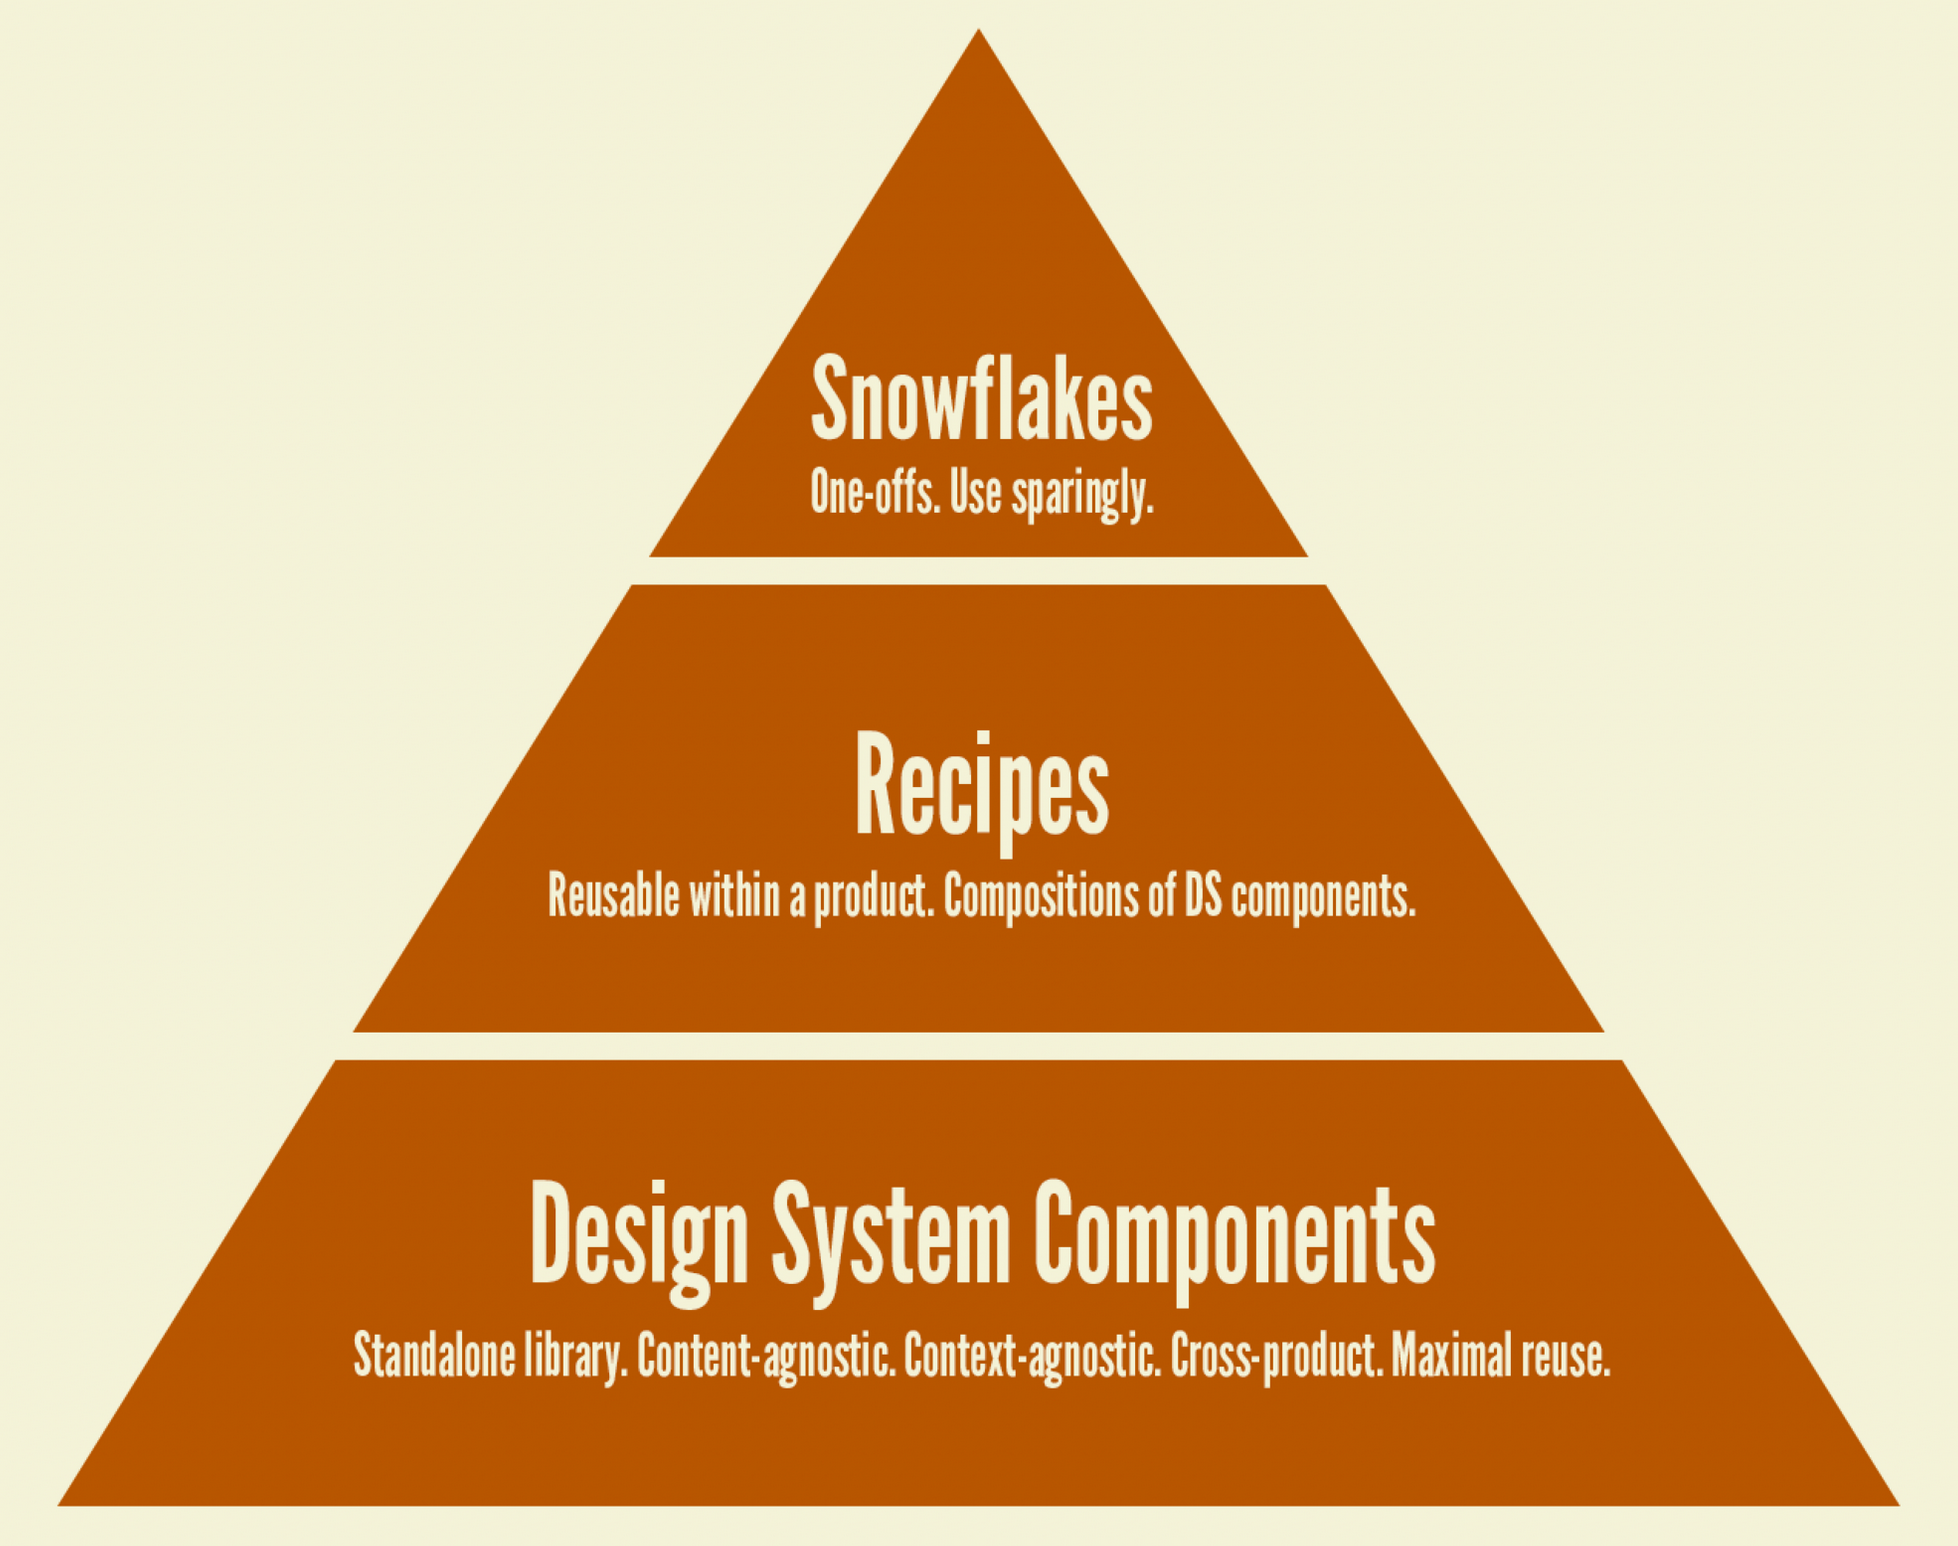 Layered system in form of a pyramid: design system components as base,
  recipes in the middle and snowflakes (one-offs) on the top